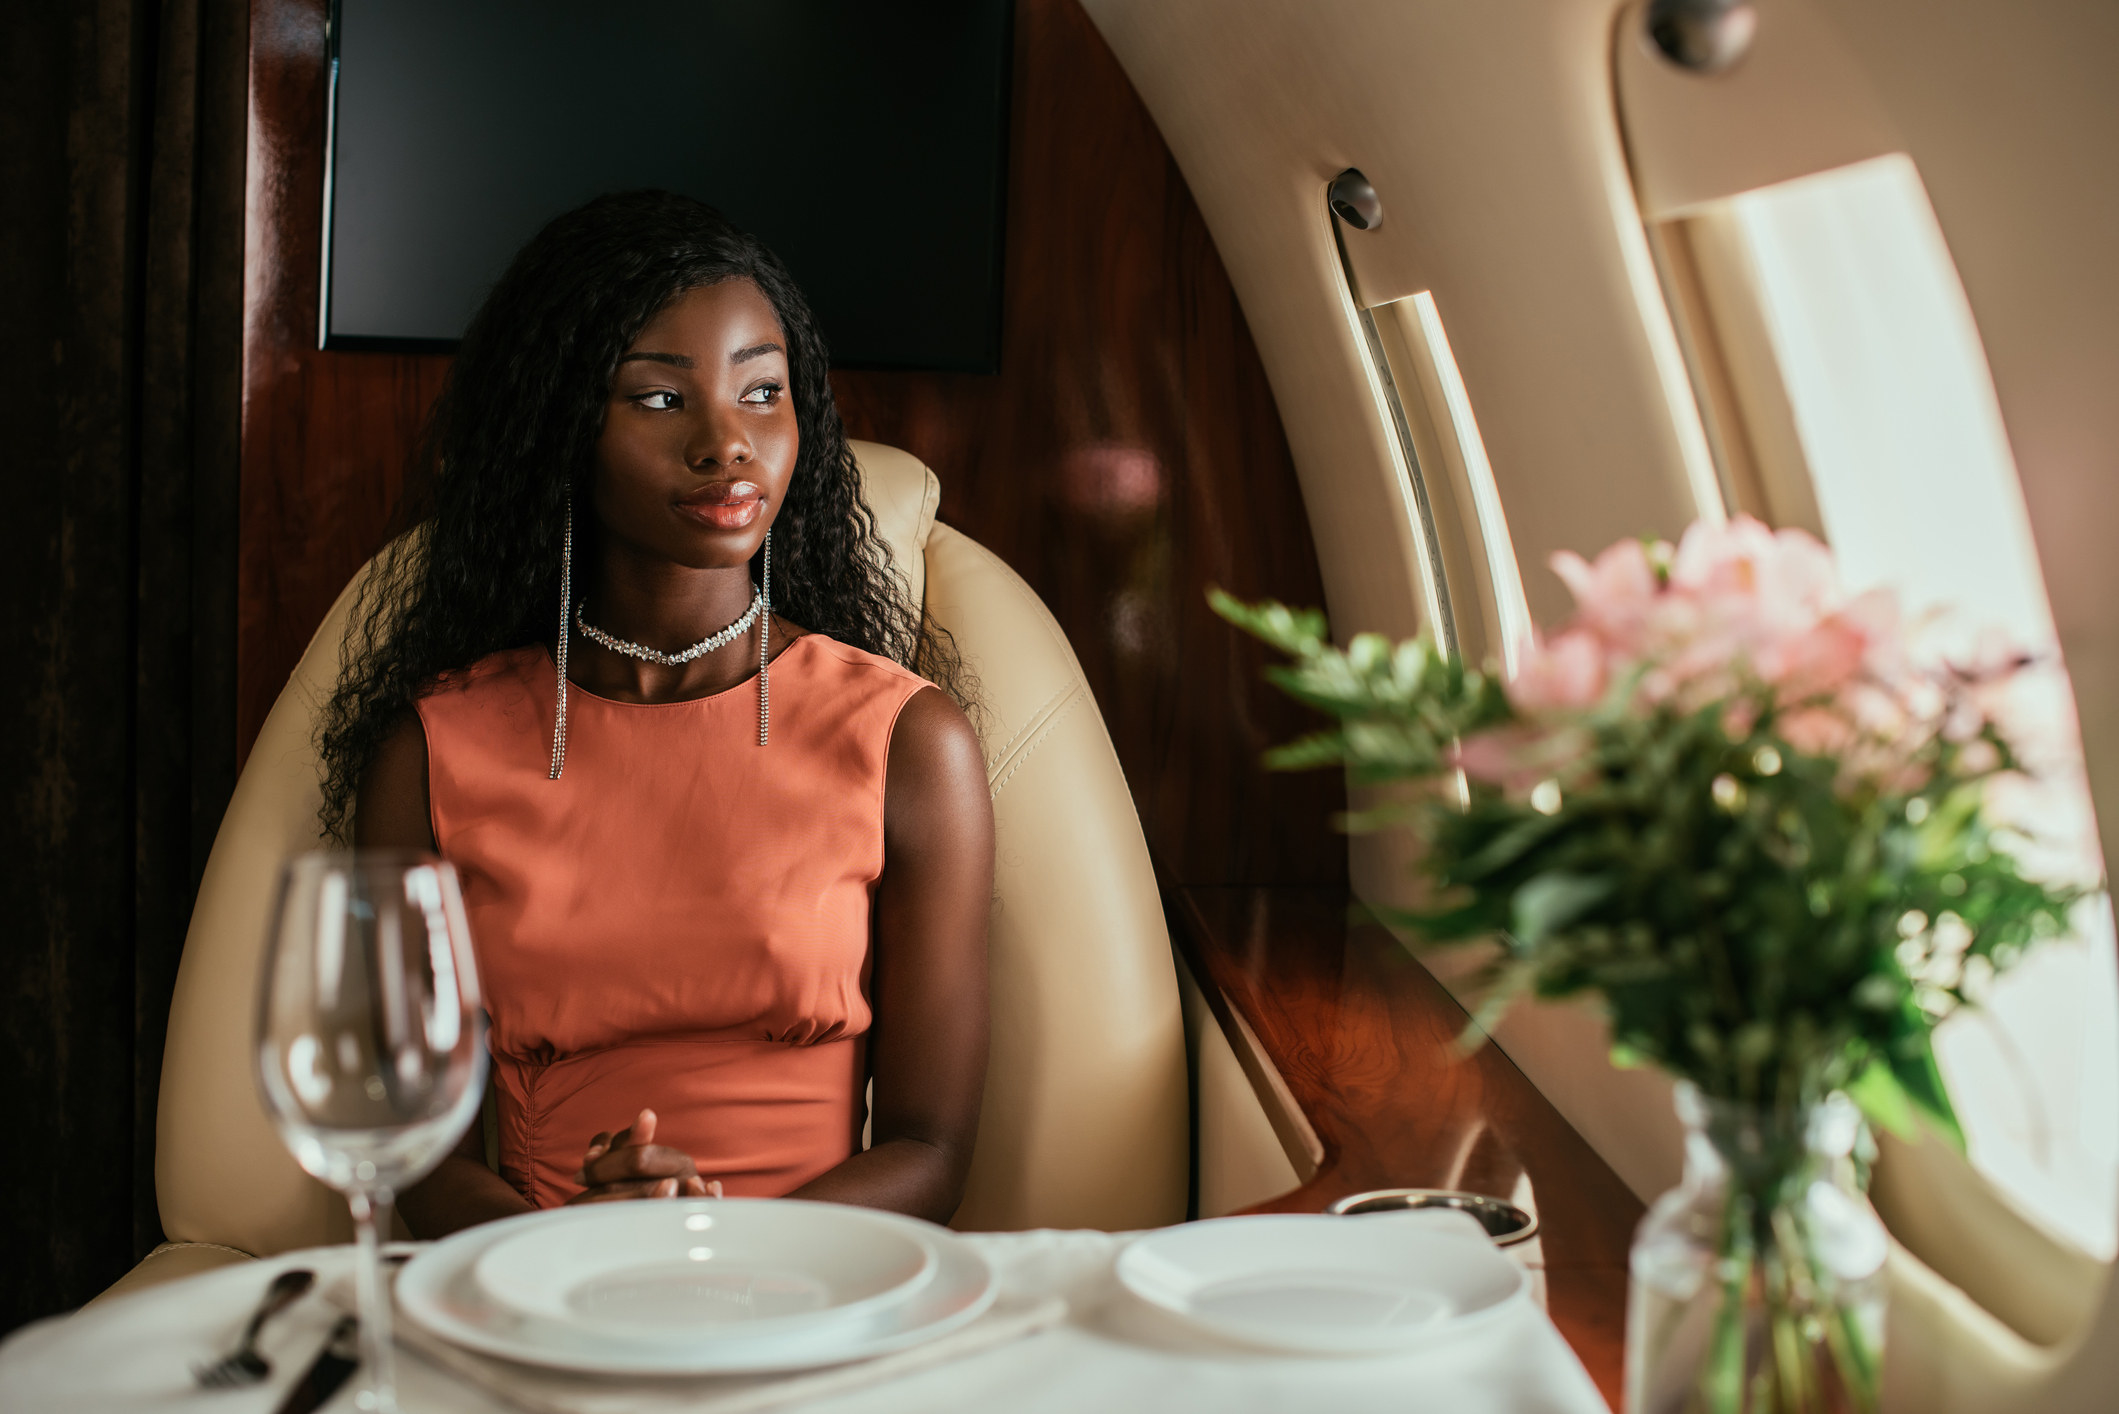 A woman on a private jet